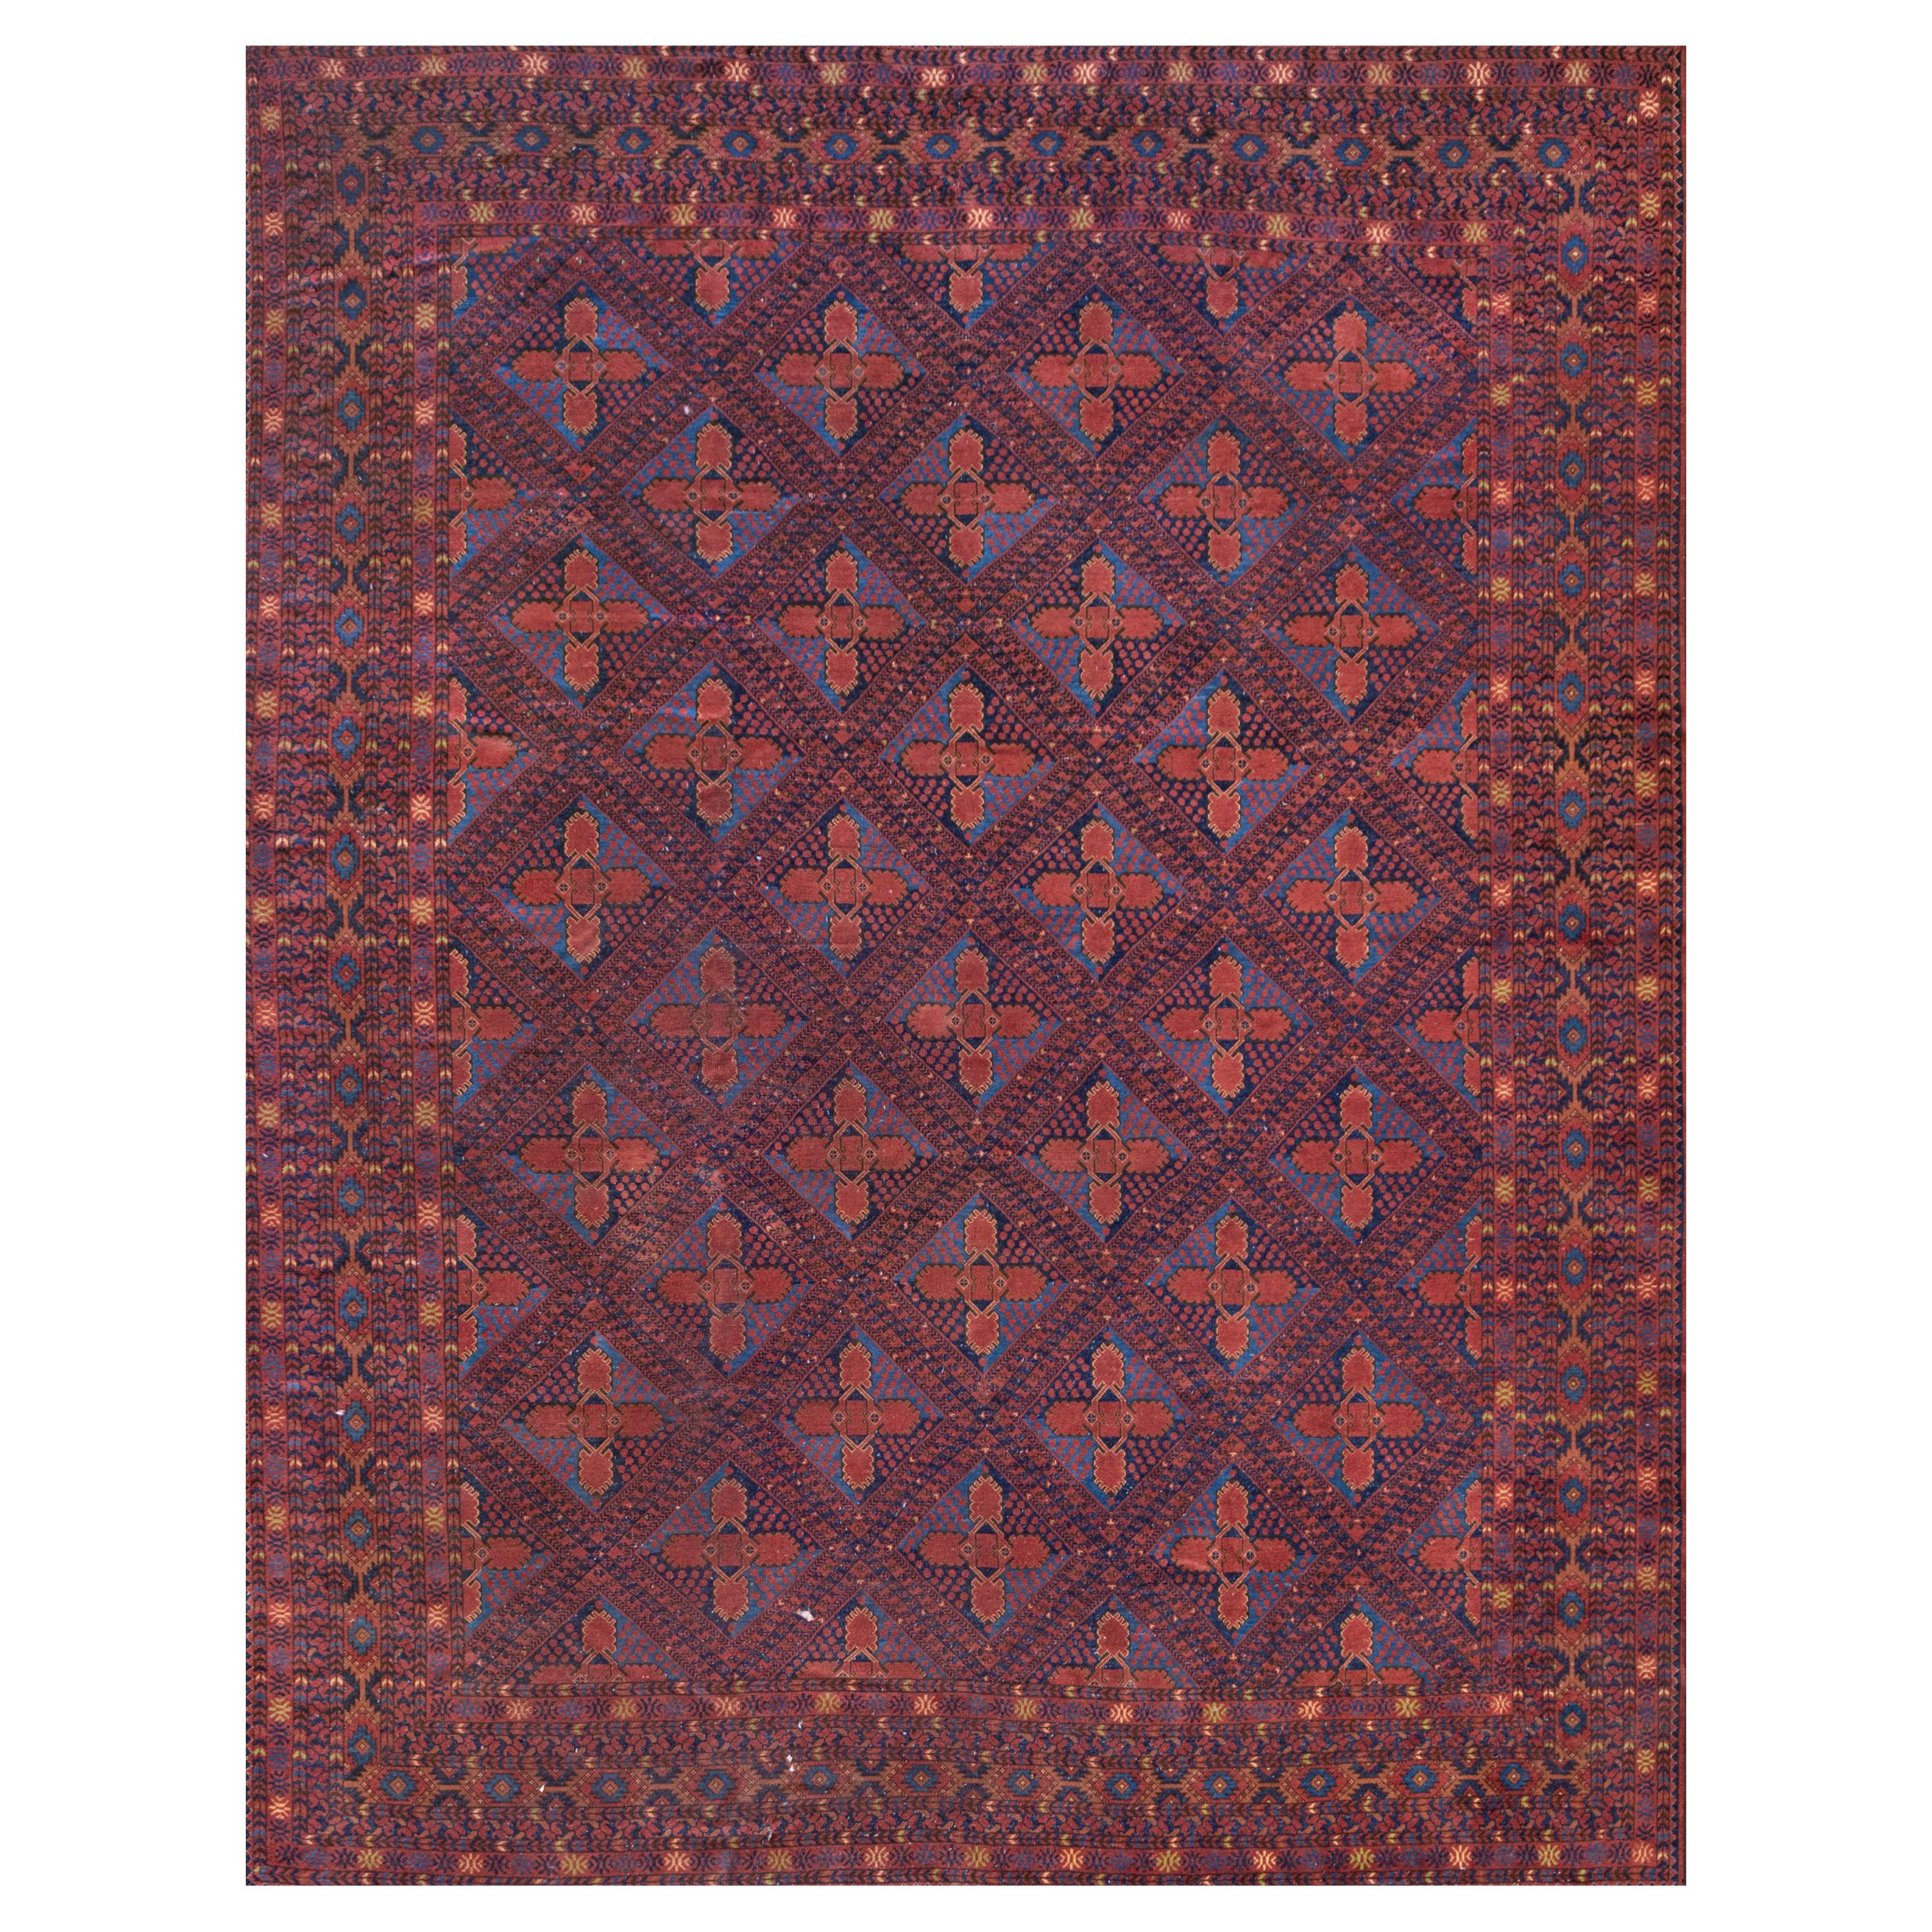 Late 19th Century Handwoven Antique Bokhara Rug